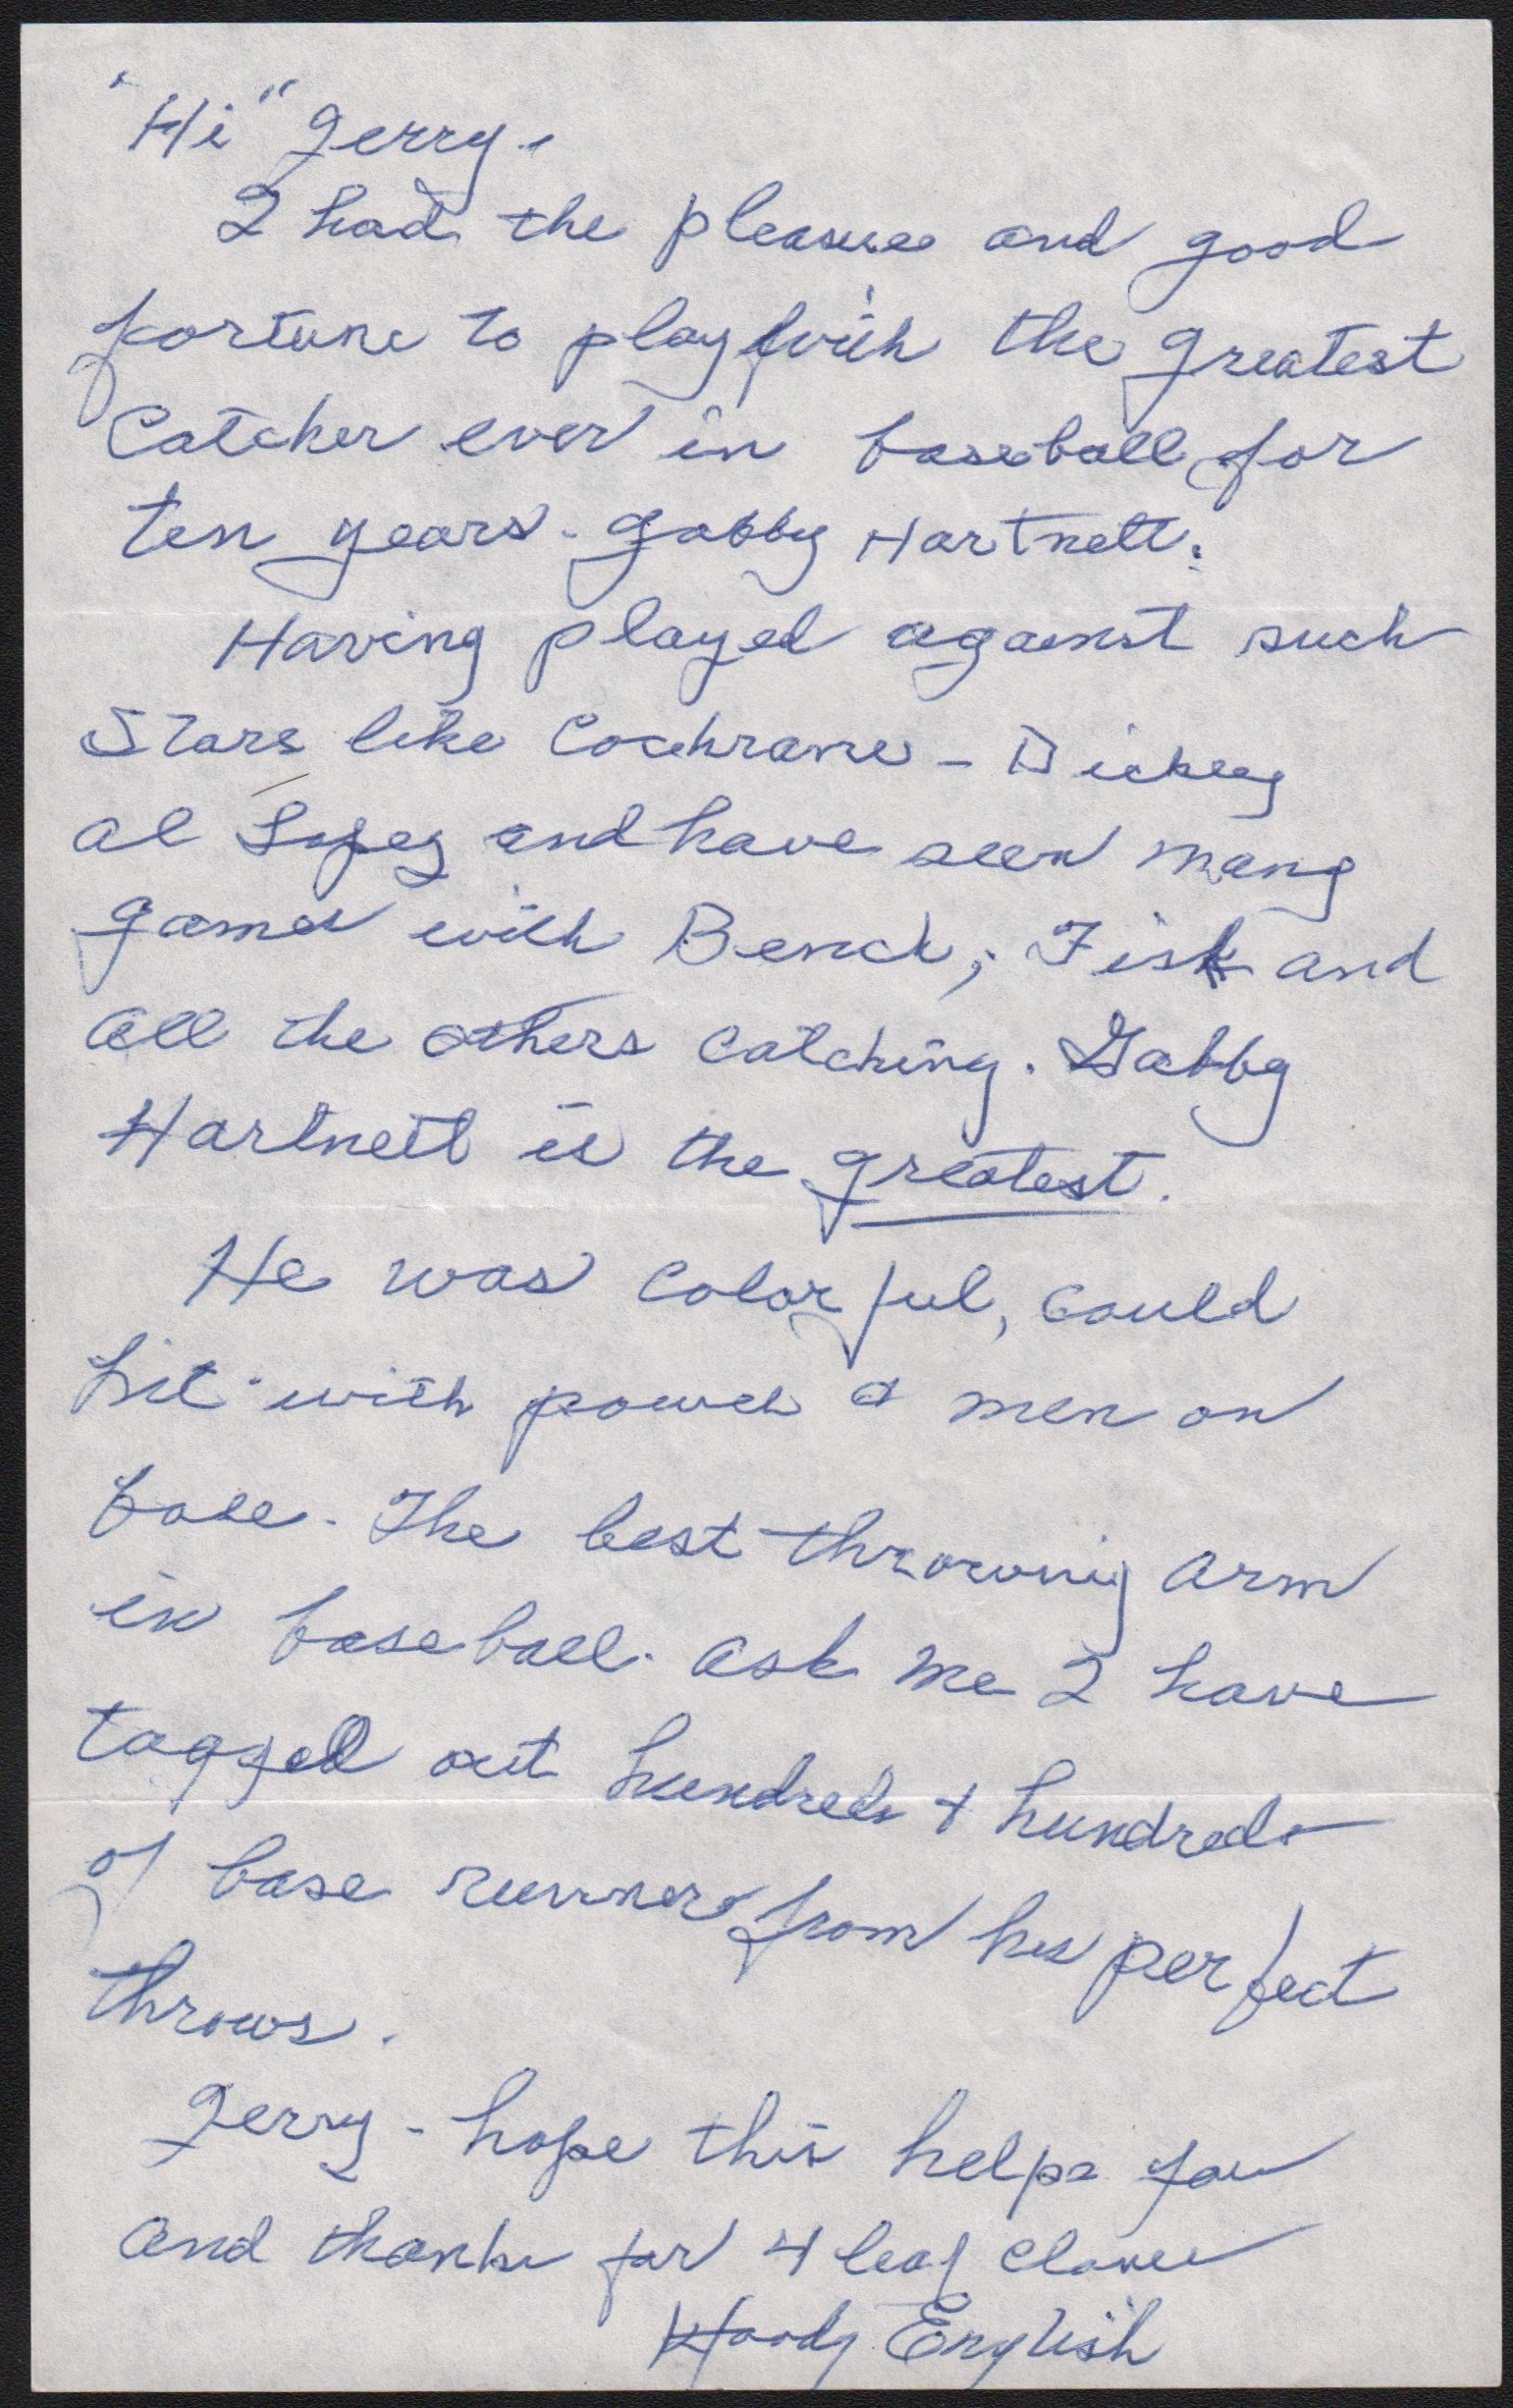 Woody English Hand Written Letter w/ "Greatest Catchers" Content